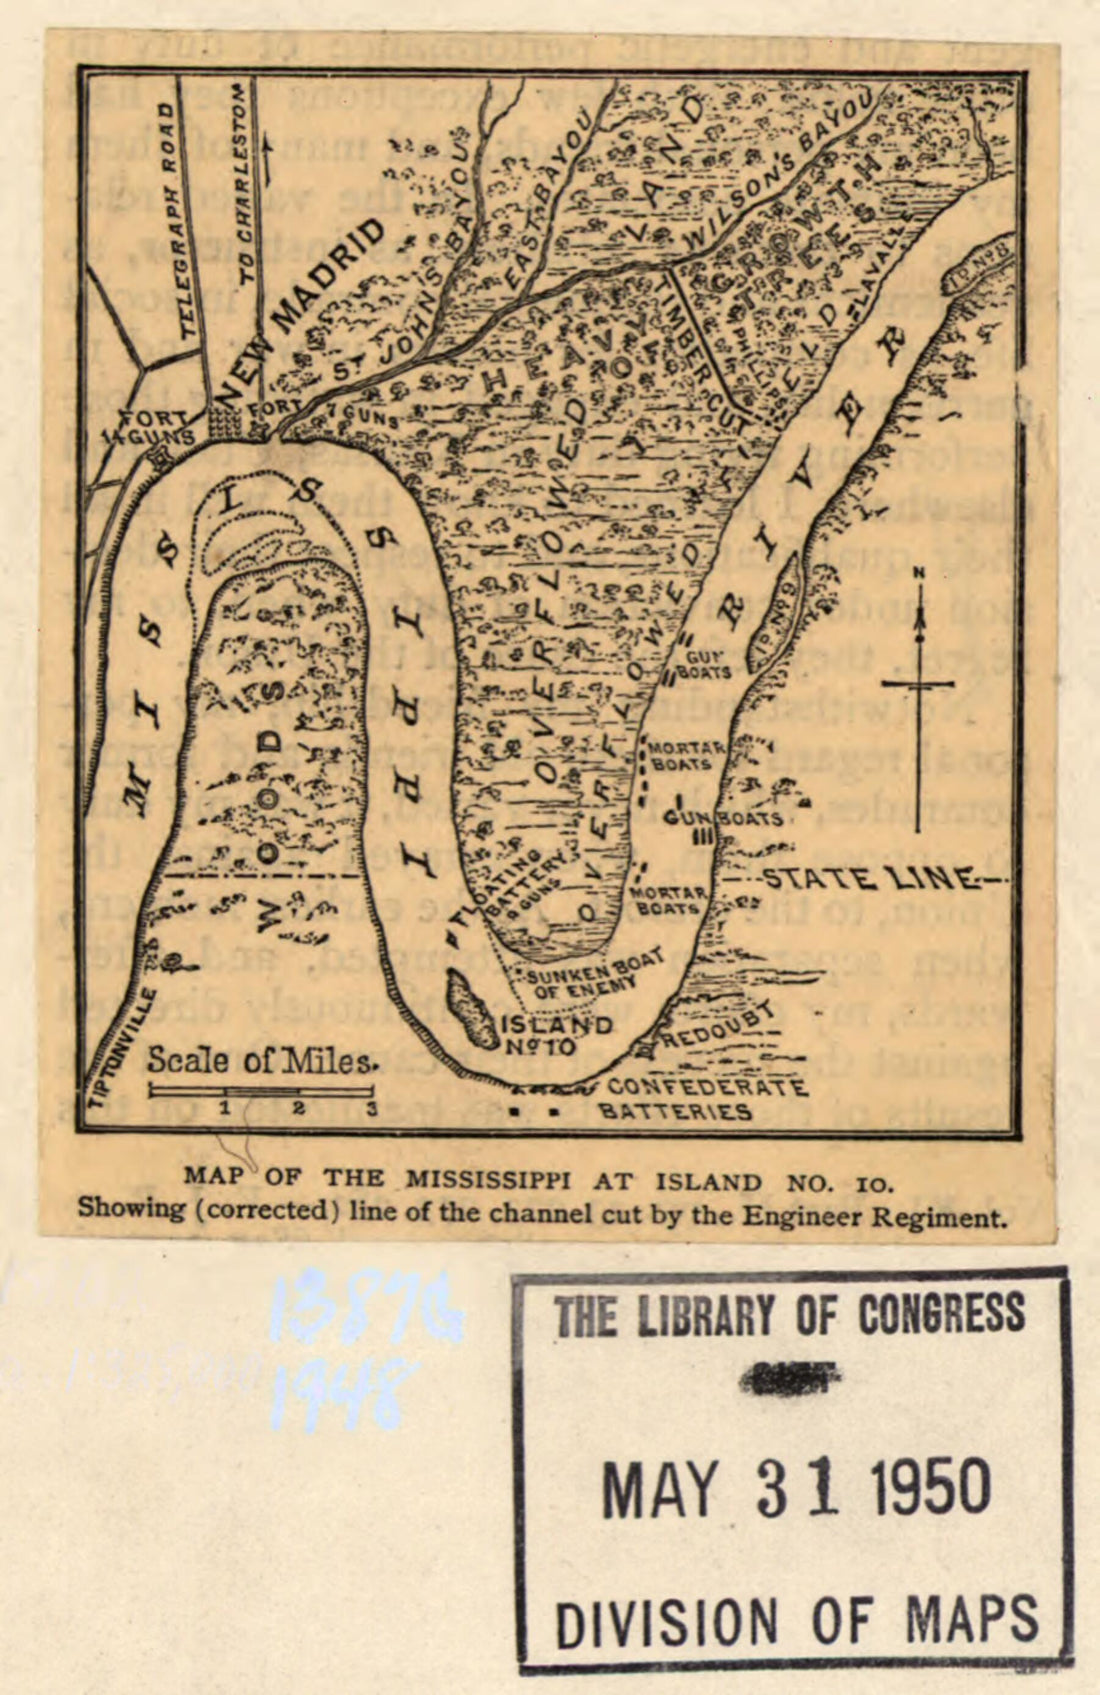 This old map of Map of the Mississippi at Island No. 10. Showing (corrected) Line of the Channel Cut by the Engineer Regiment from 1885 was created by J. W. Bissell in 1885